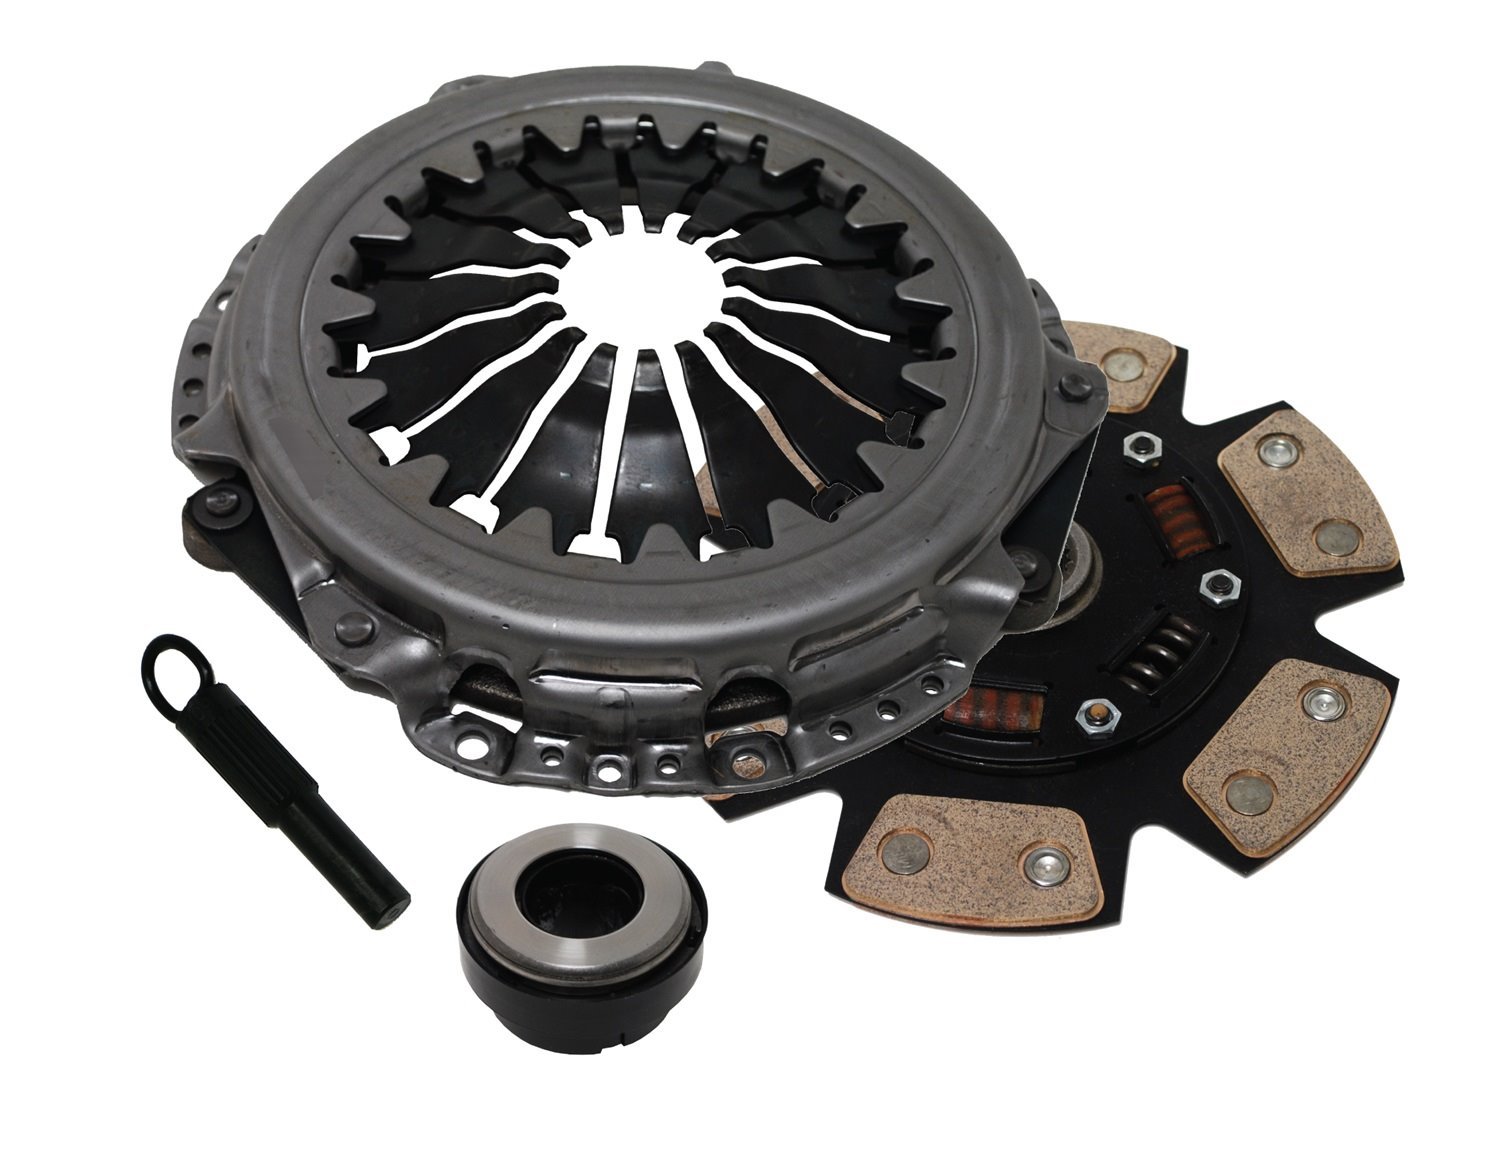 Powergrip Clutch Kit Ford Ranger: 1988-92 2.9L and